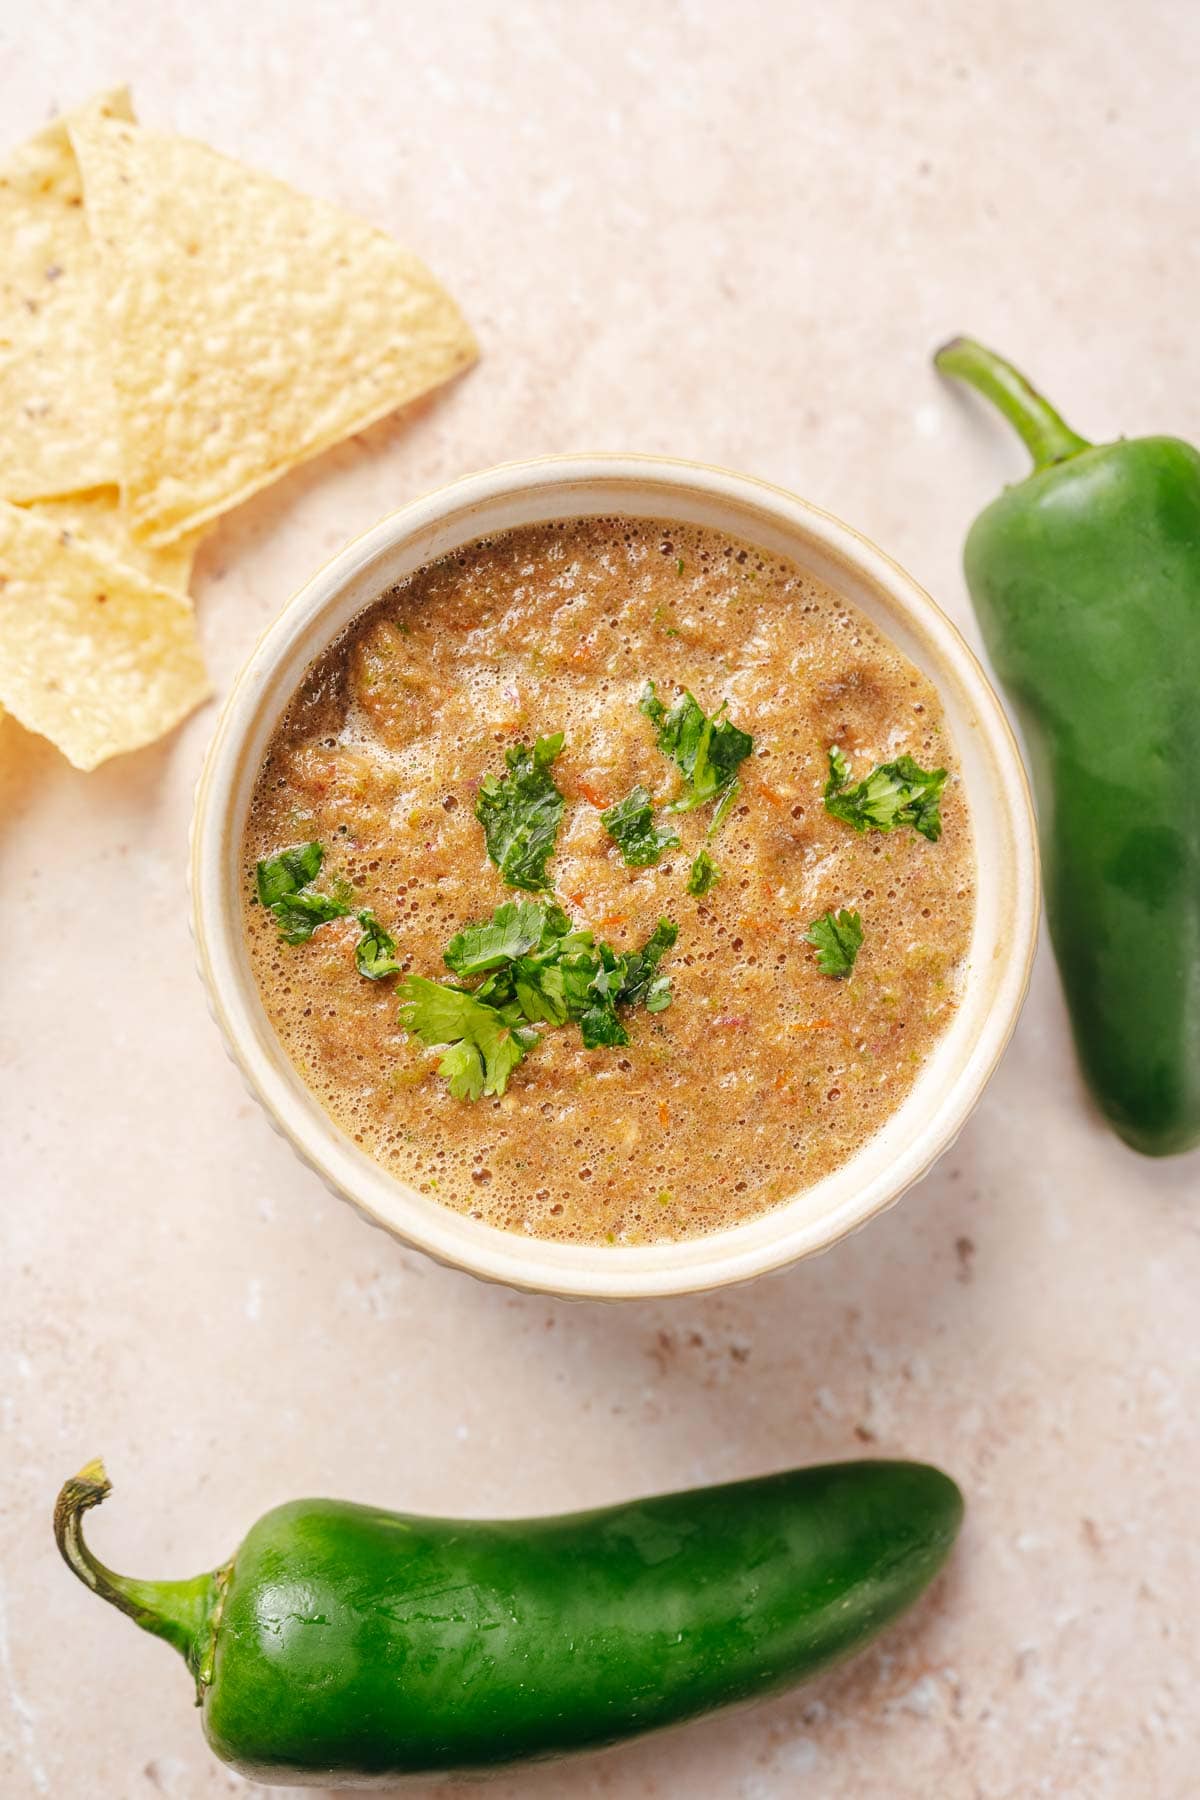 A small dish of homemade salsa garnished with fresh cilantro.